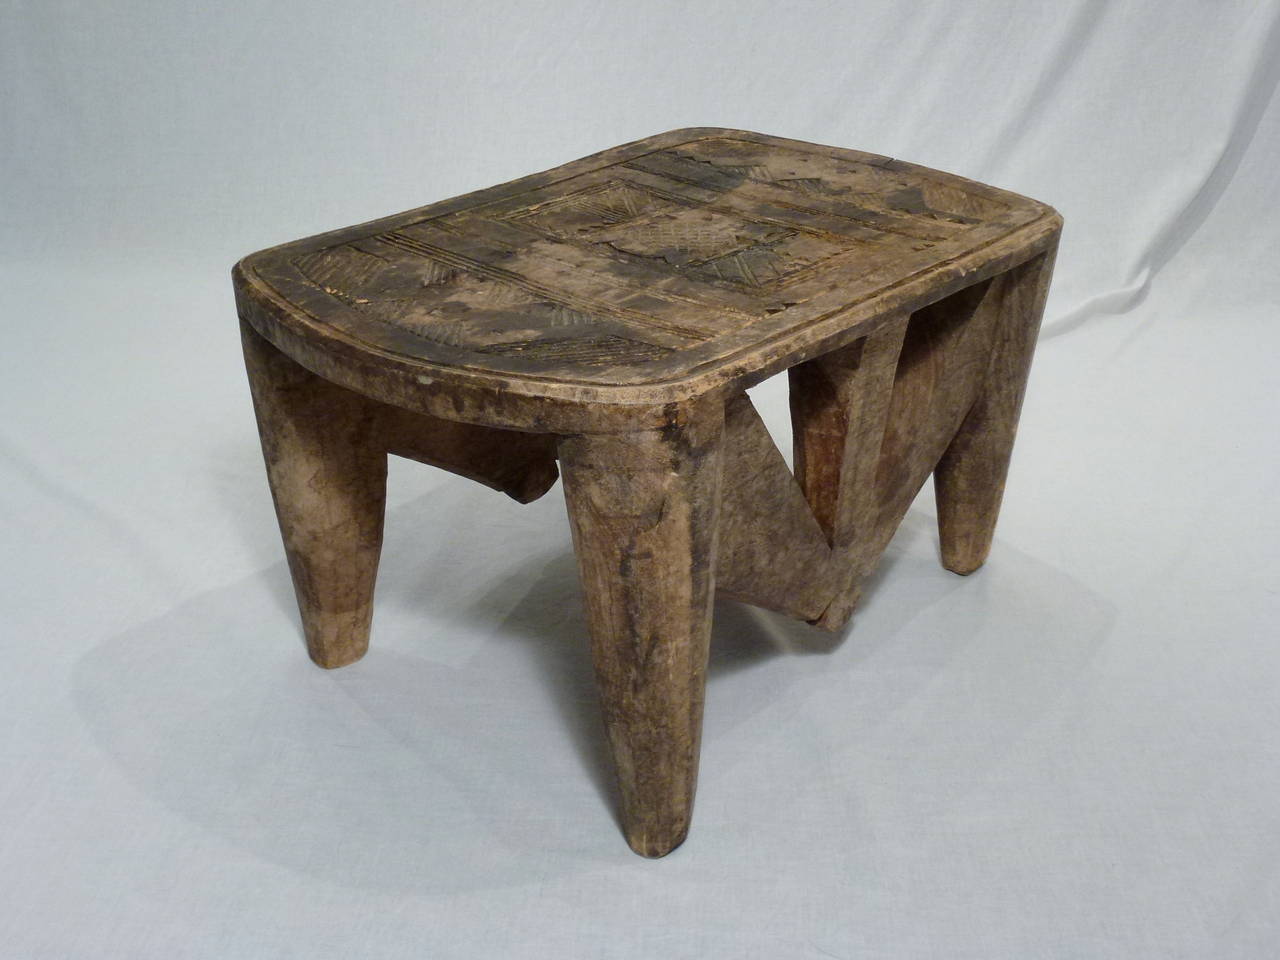 Antique African Nupe stool from Nigeria. Hand-carved from a single piece of wood, this stool boasts richly carved surfaces. Beautifully patinated surface.